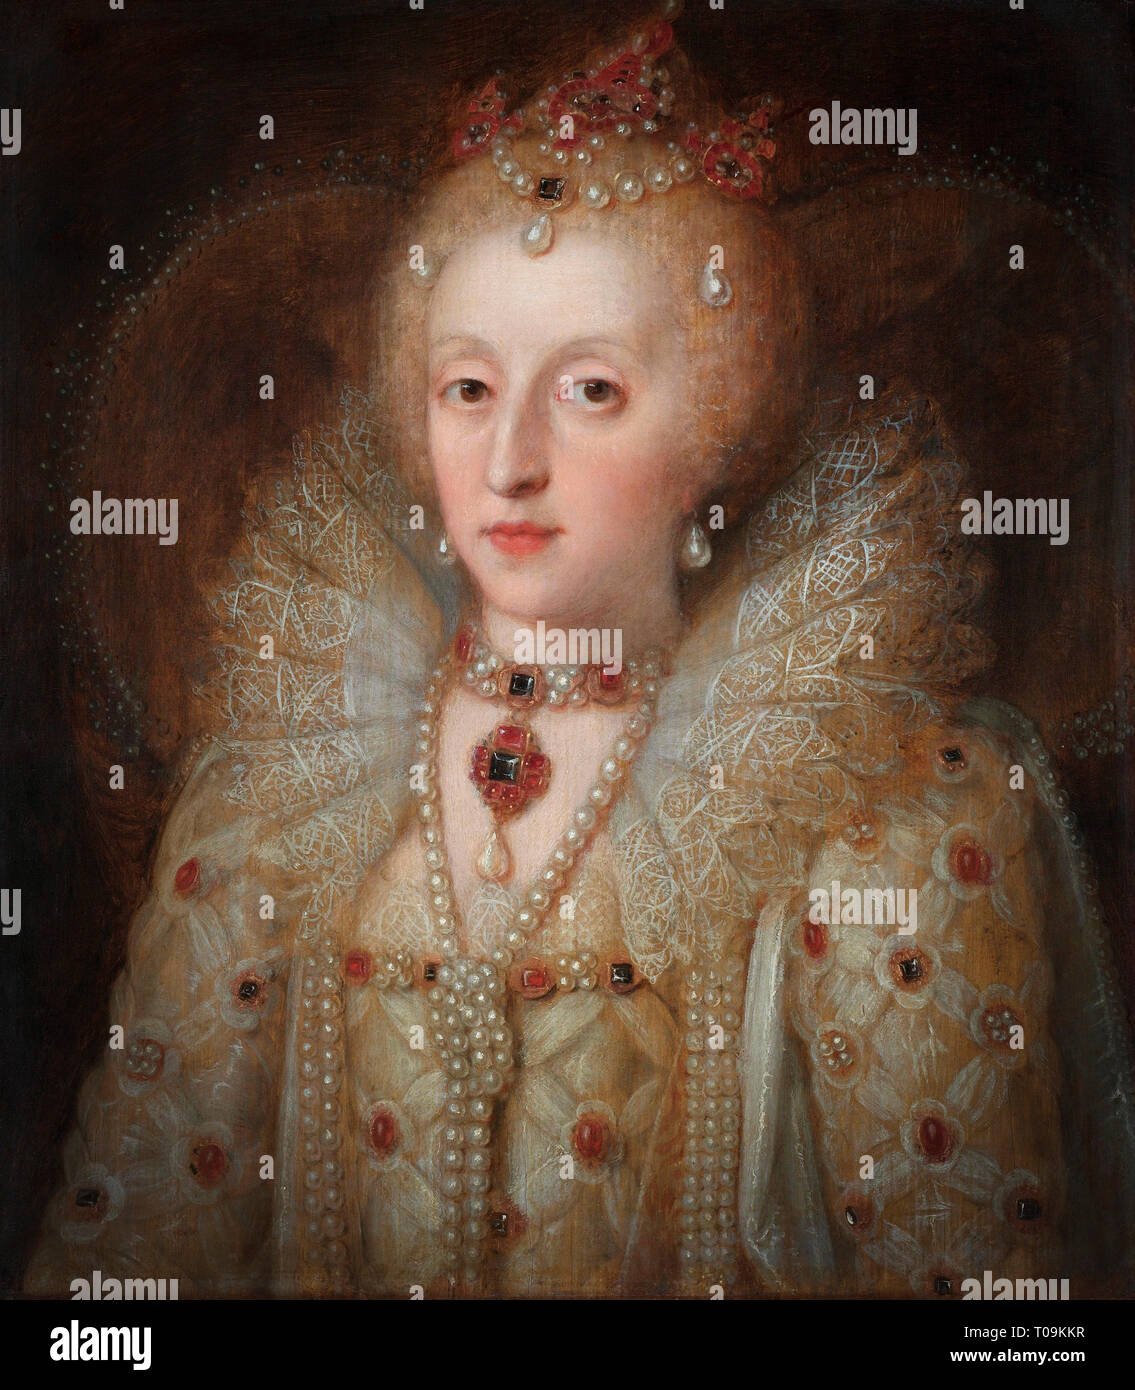 Elizabeth I, aka The Virgin Queen, Gloriana or Good Queen Bess, 1533 – 1603. Queen of England and Ireland.  After an anonymous contemporary portrait in the Rijksmuseum, Amsterdam, Netherlands. Stock Photo